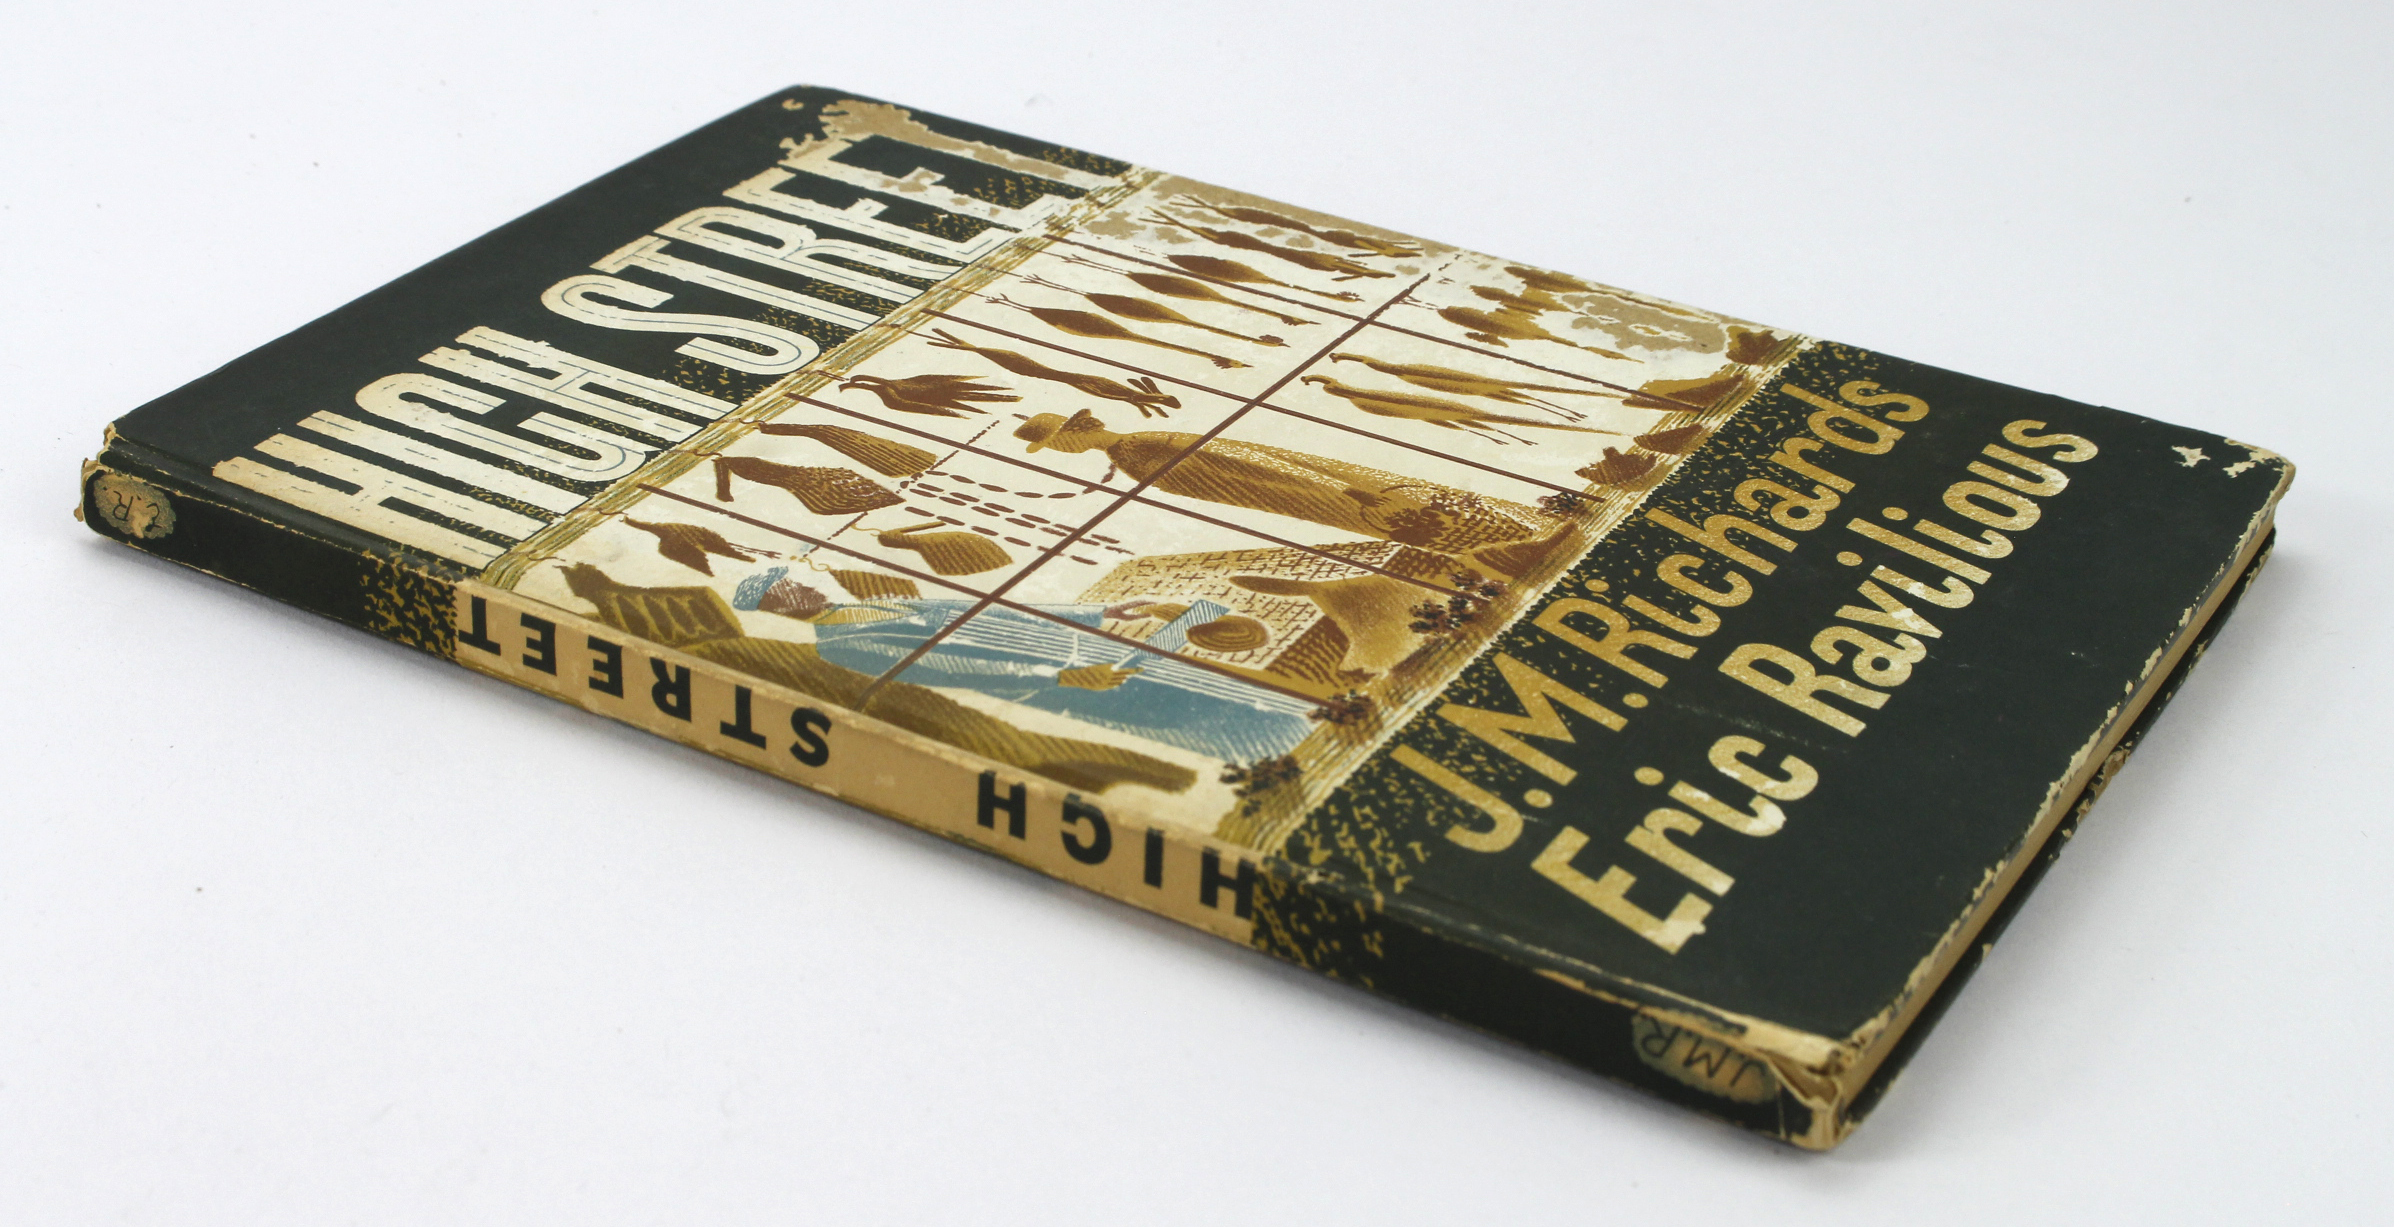 Ravilious (Eric, illustrator). High Street, by J. M. Richards, 1st Edition, published Country Life